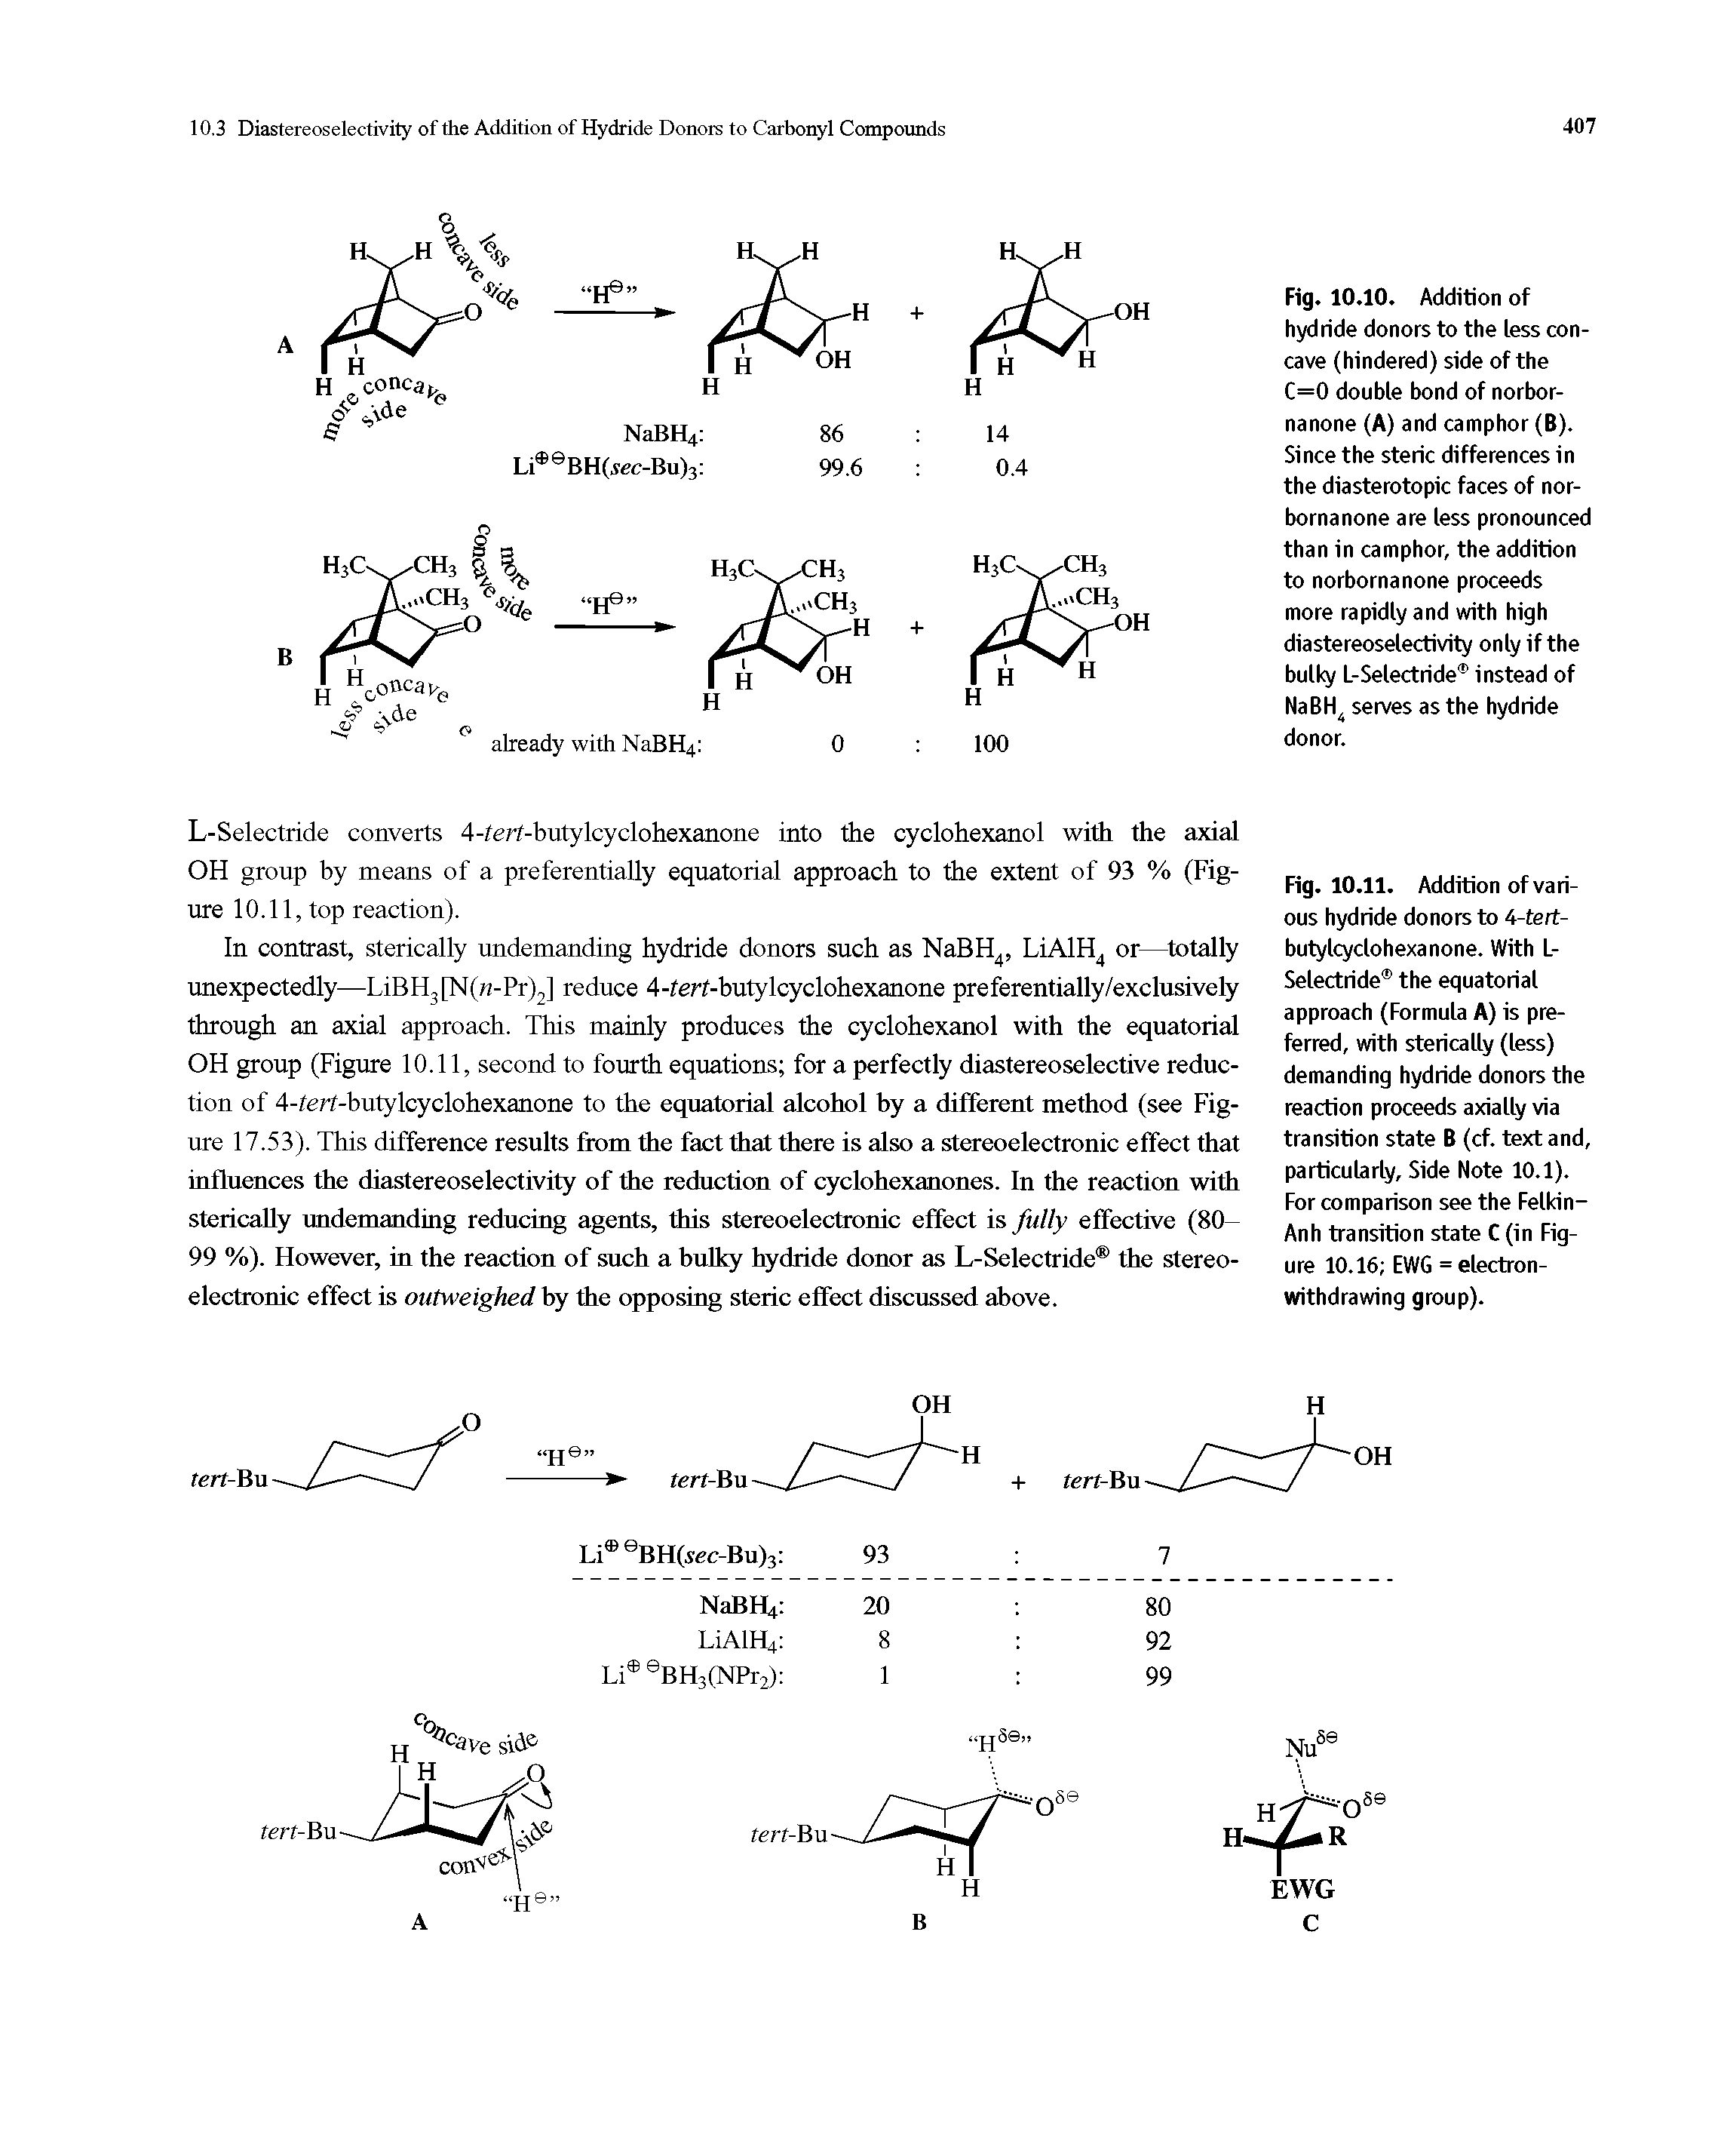 Fig. 10.11. Addition of various hydride donors to 4-tert-butylcyclohexanone. With L-Selectride the equatorial approach (Formula A) is preferred, with sterically (less) demanding hydride donors the reaction proceeds axially via transition state B (cf. text and, particularly. Side Note 10.1). For comparison see the Felkin-Anh transition state C (in Figure 10.16 EWG = electron-withdrawing group).